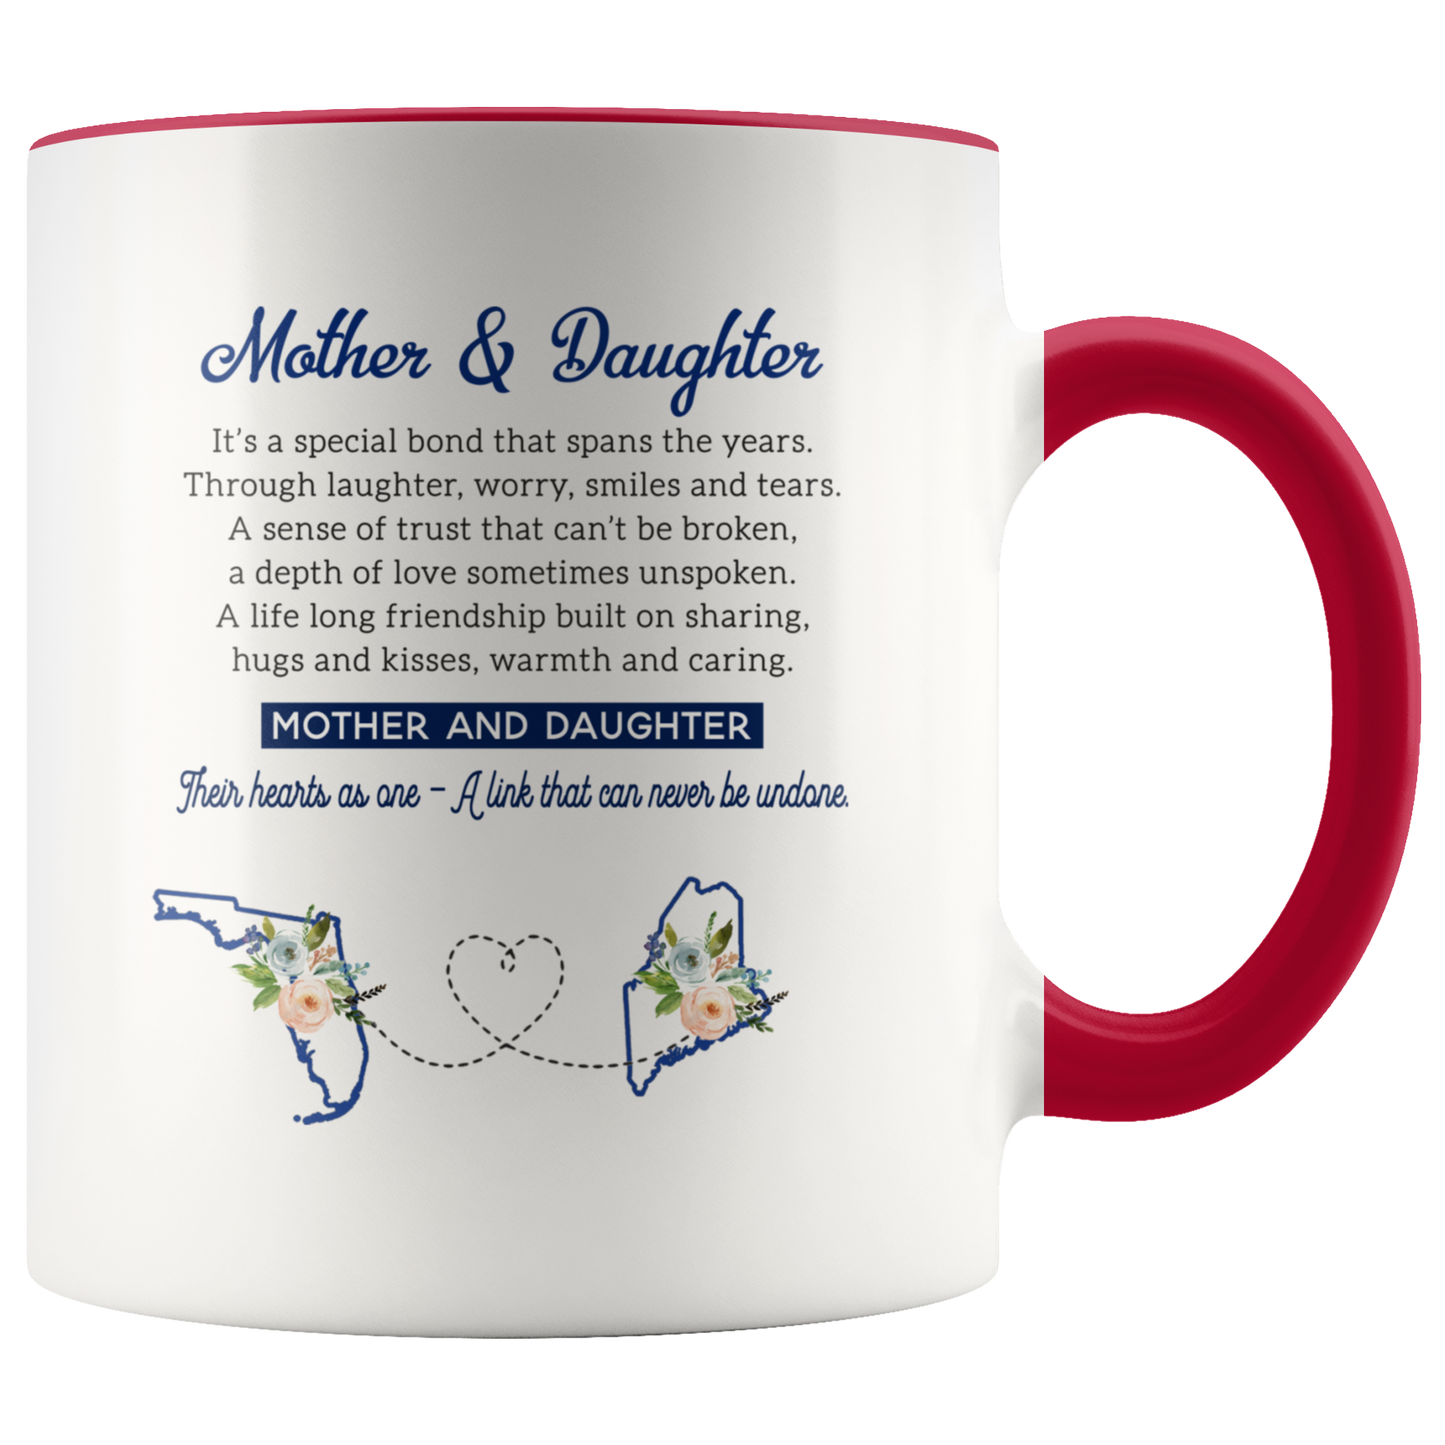 ND-21357594-sp-24255 - [ Florida | Maine ]Long Distance Mom And Daughter Gifts - Mother And Daughter.